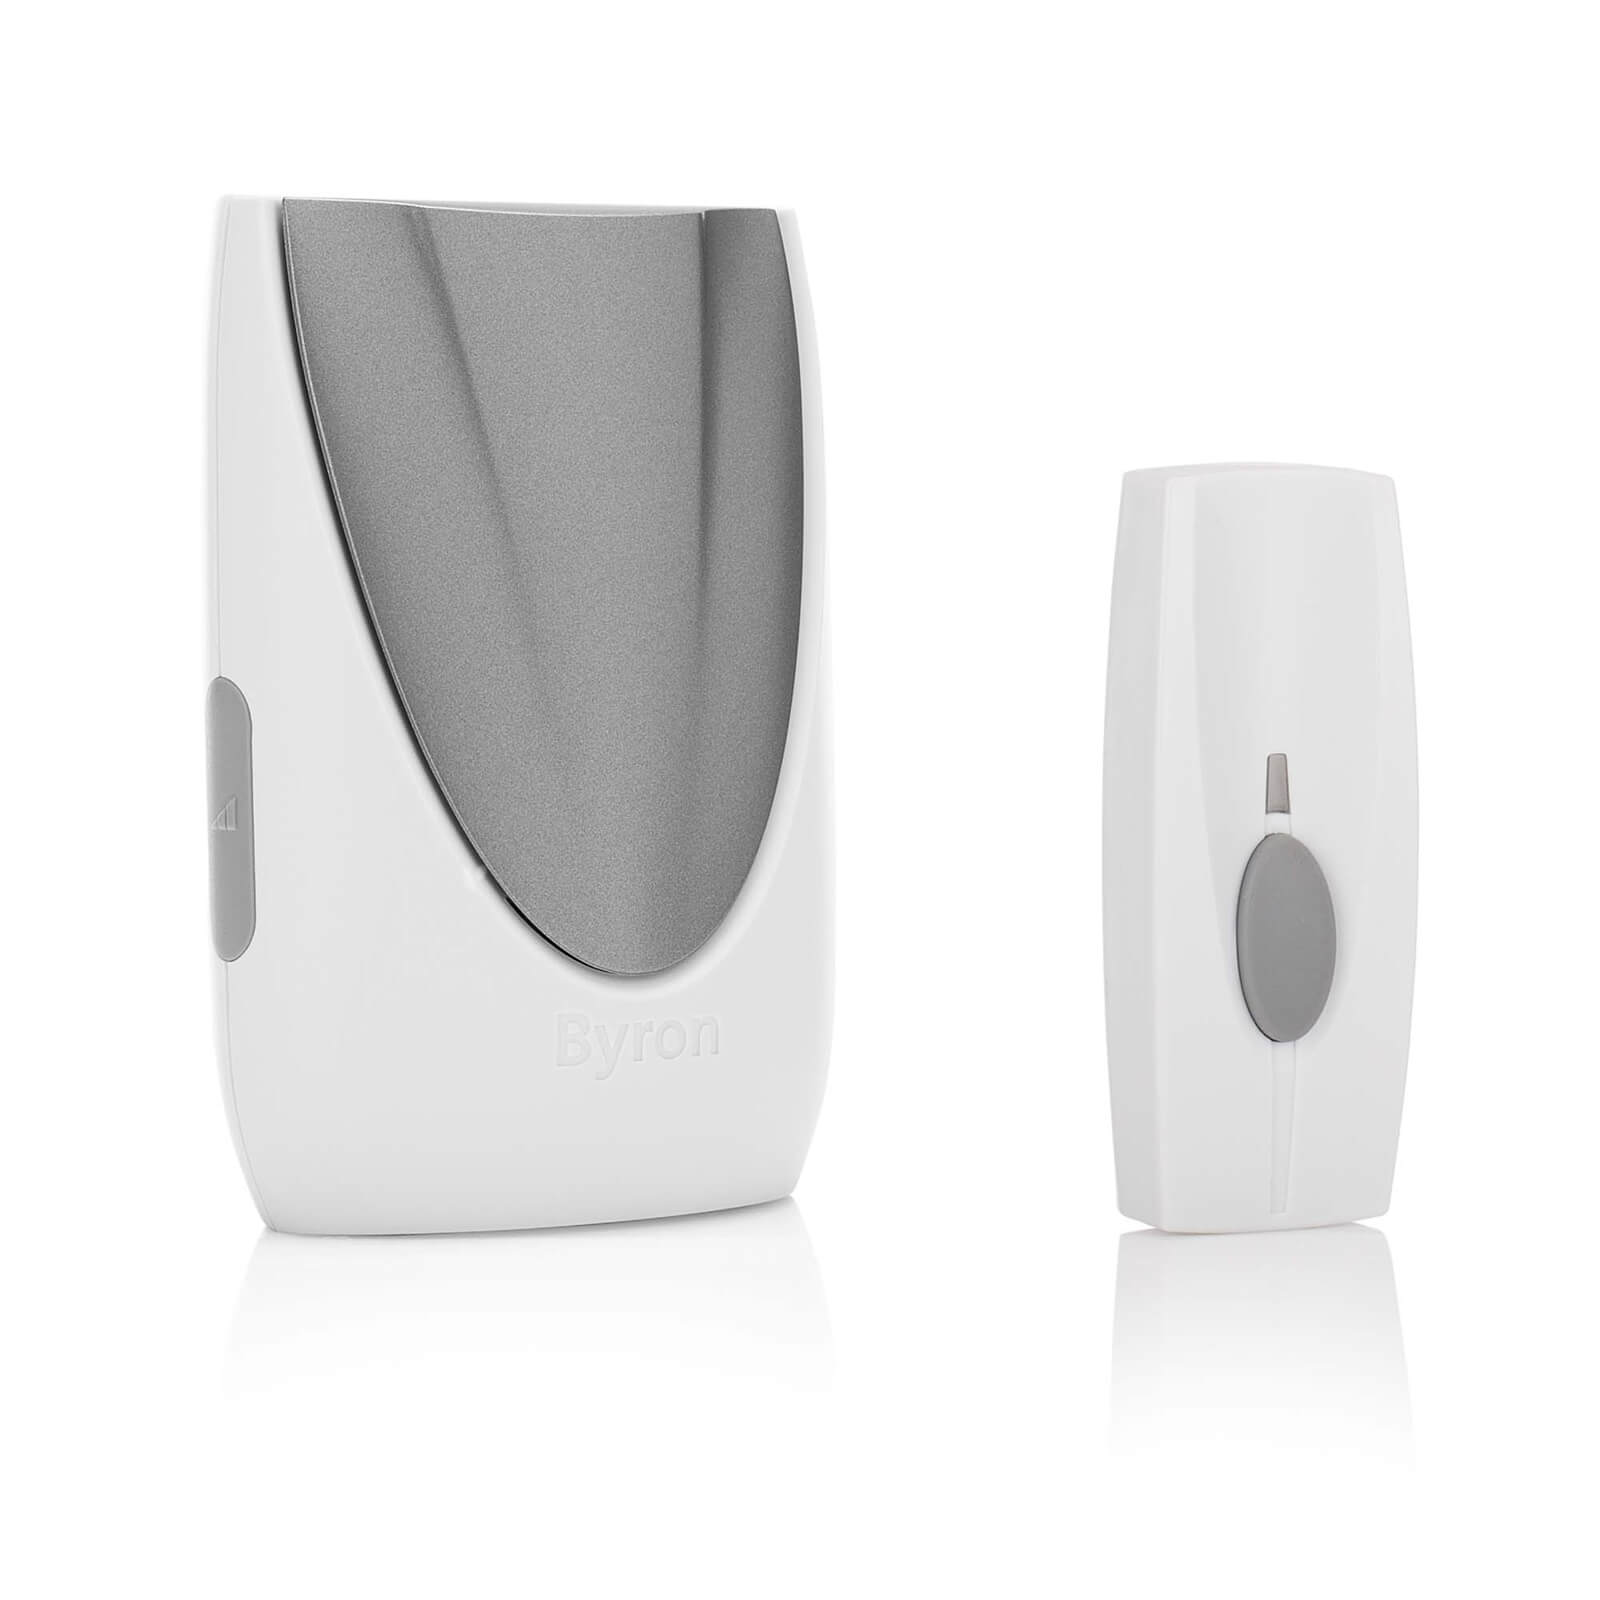 Byron BY206 Wireless Portable Door Chime Kit